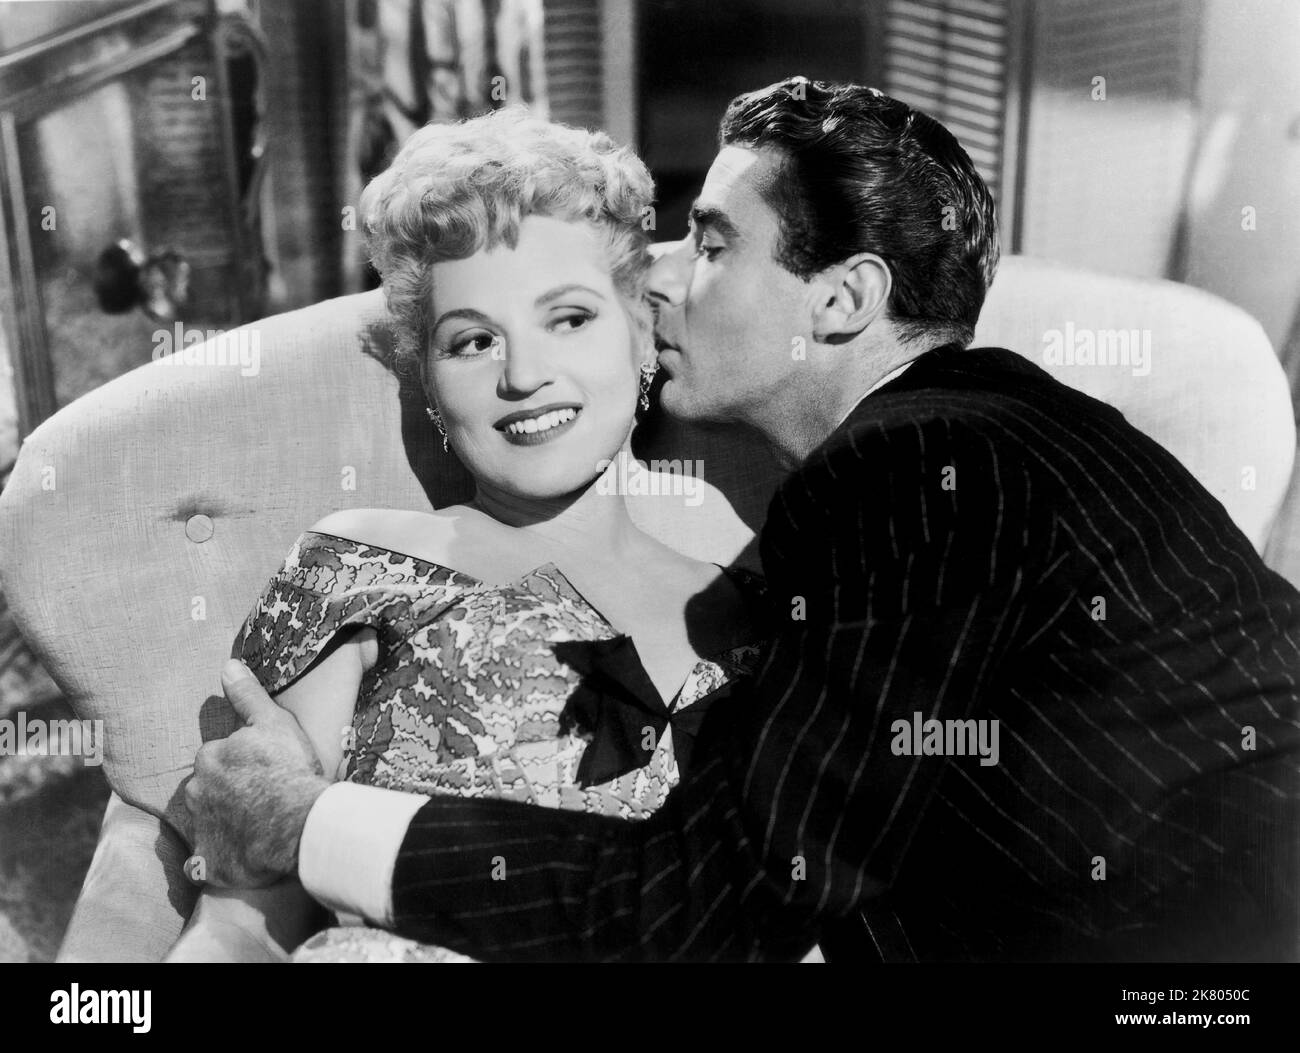 https://c8.alamy.com/comp/2K8050C/judy-holliday-peter-lawford-film-it-should-happen-to-you-1954-characters-gladys-glover-evan-adams-iii-director-george-cukor-15-january-1954-warning-this-photograph-is-for-editorial-use-only-and-is-the-copyright-of-columbia-andor-the-photographer-assigned-by-the-film-or-production-company-and-can-only-be-reproduced-by-publications-in-conjunction-with-the-promotion-of-the-above-film-a-mandatory-credit-to-columbia-is-required-the-photographer-should-also-be-credited-when-known-no-commercial-use-can-be-granted-without-written-authority-from-the-film-company-2K8050C.jpg